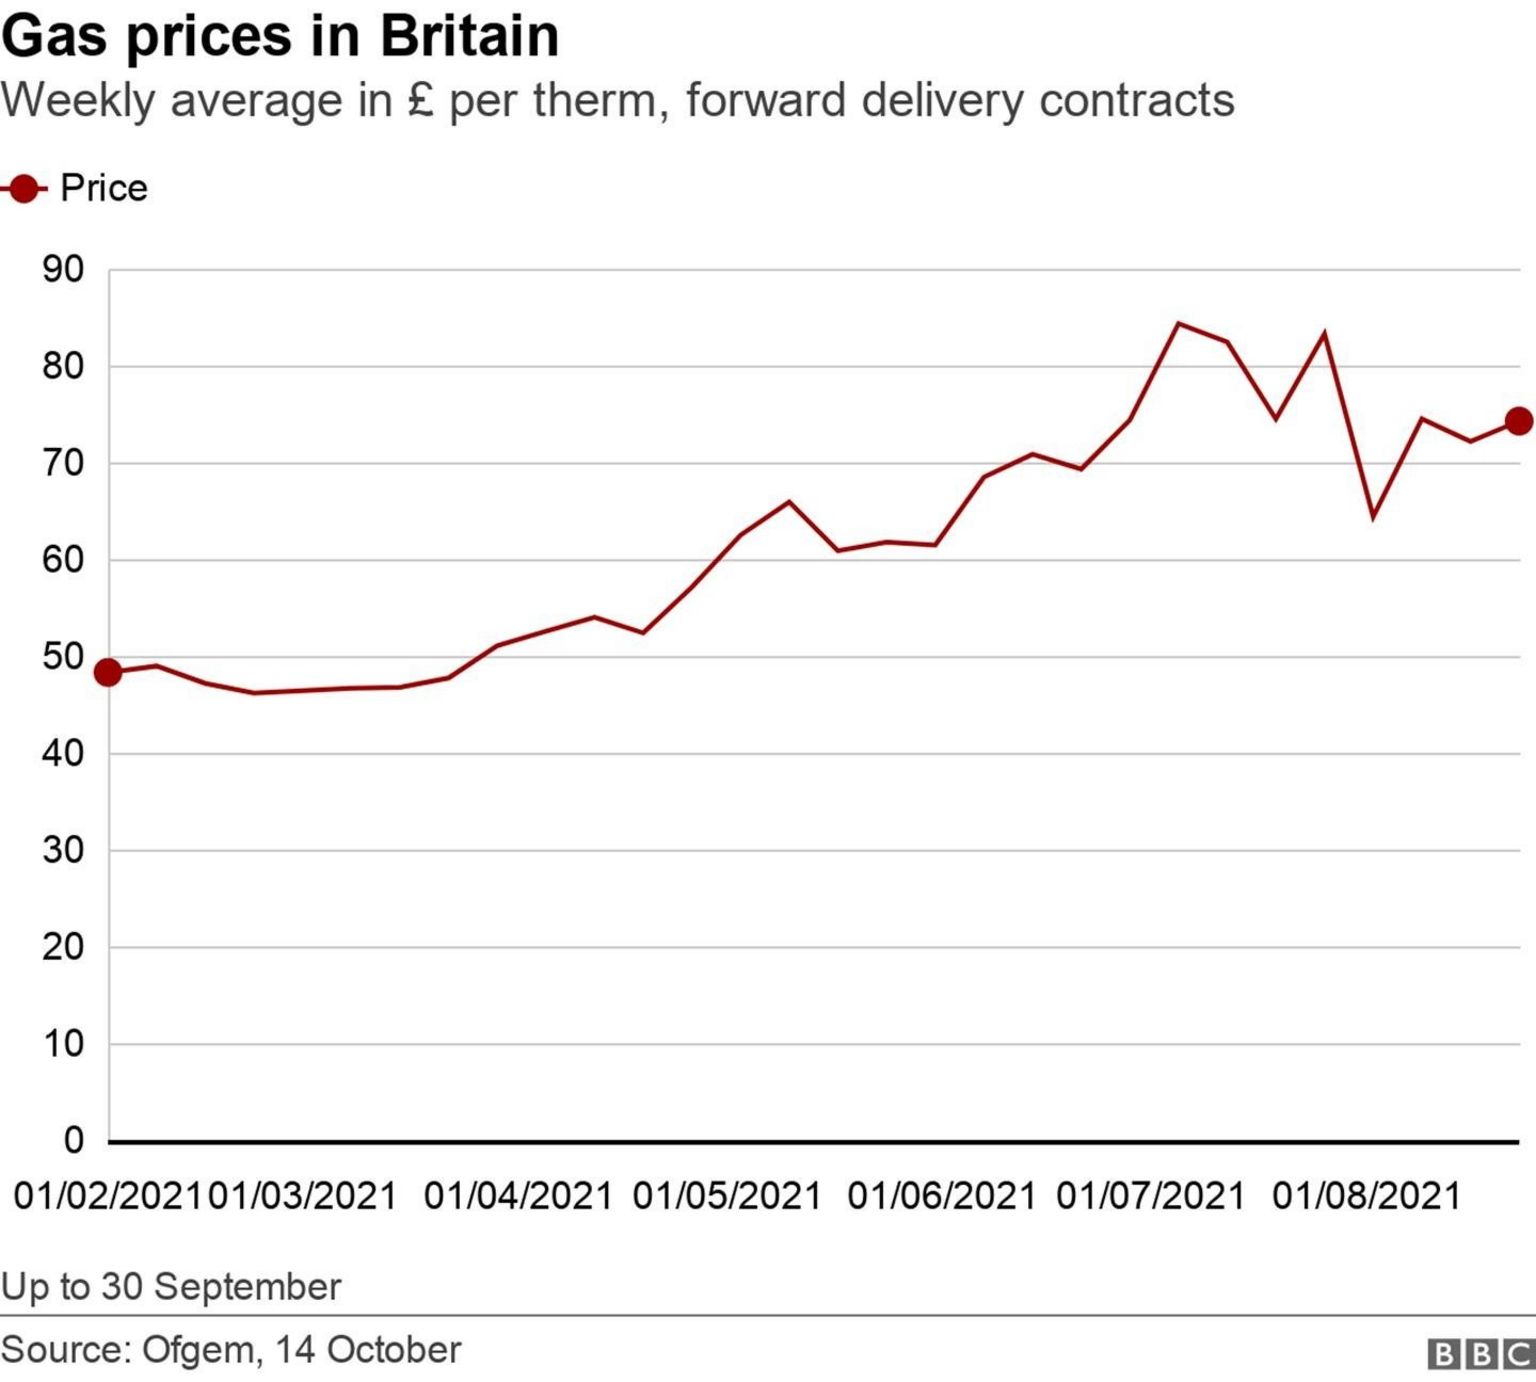 graph showing gas price changes in UK